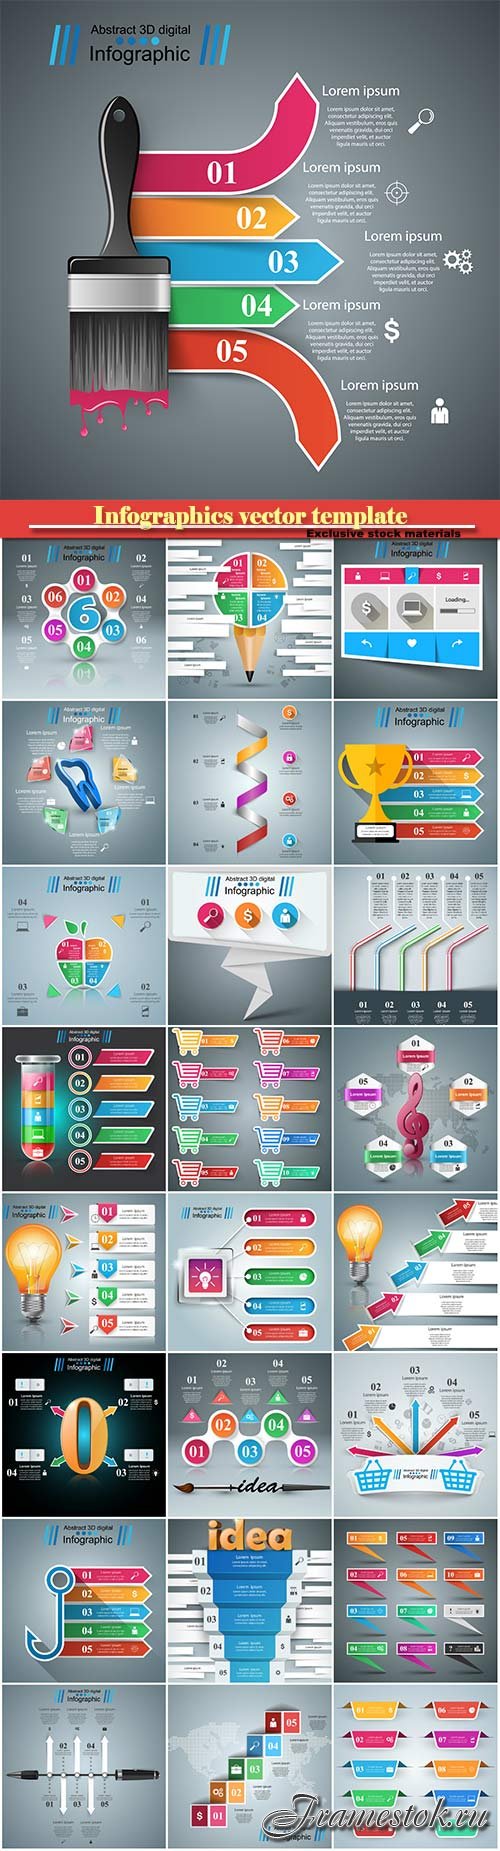 Infographics vector template for business presentations or information banner # 13